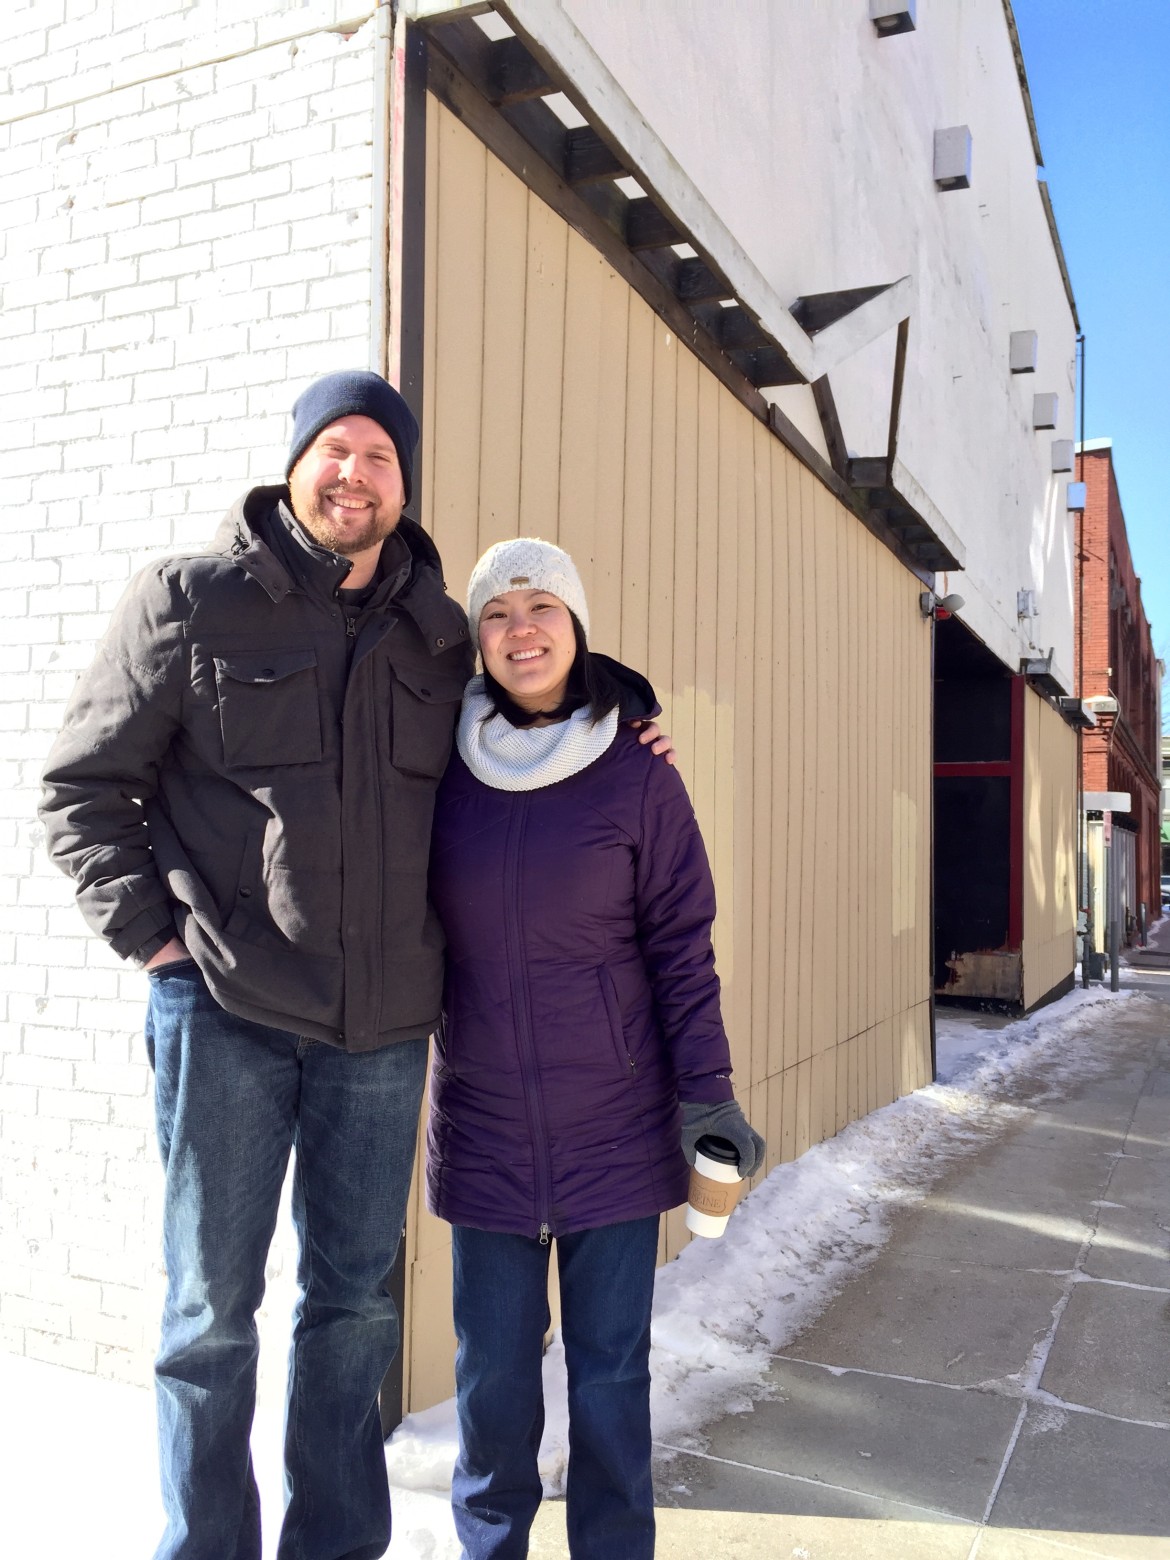 Matt and Jody Wilhelm outside 23 Amherst St., where they would like to create a unique concert venue with a community service component.